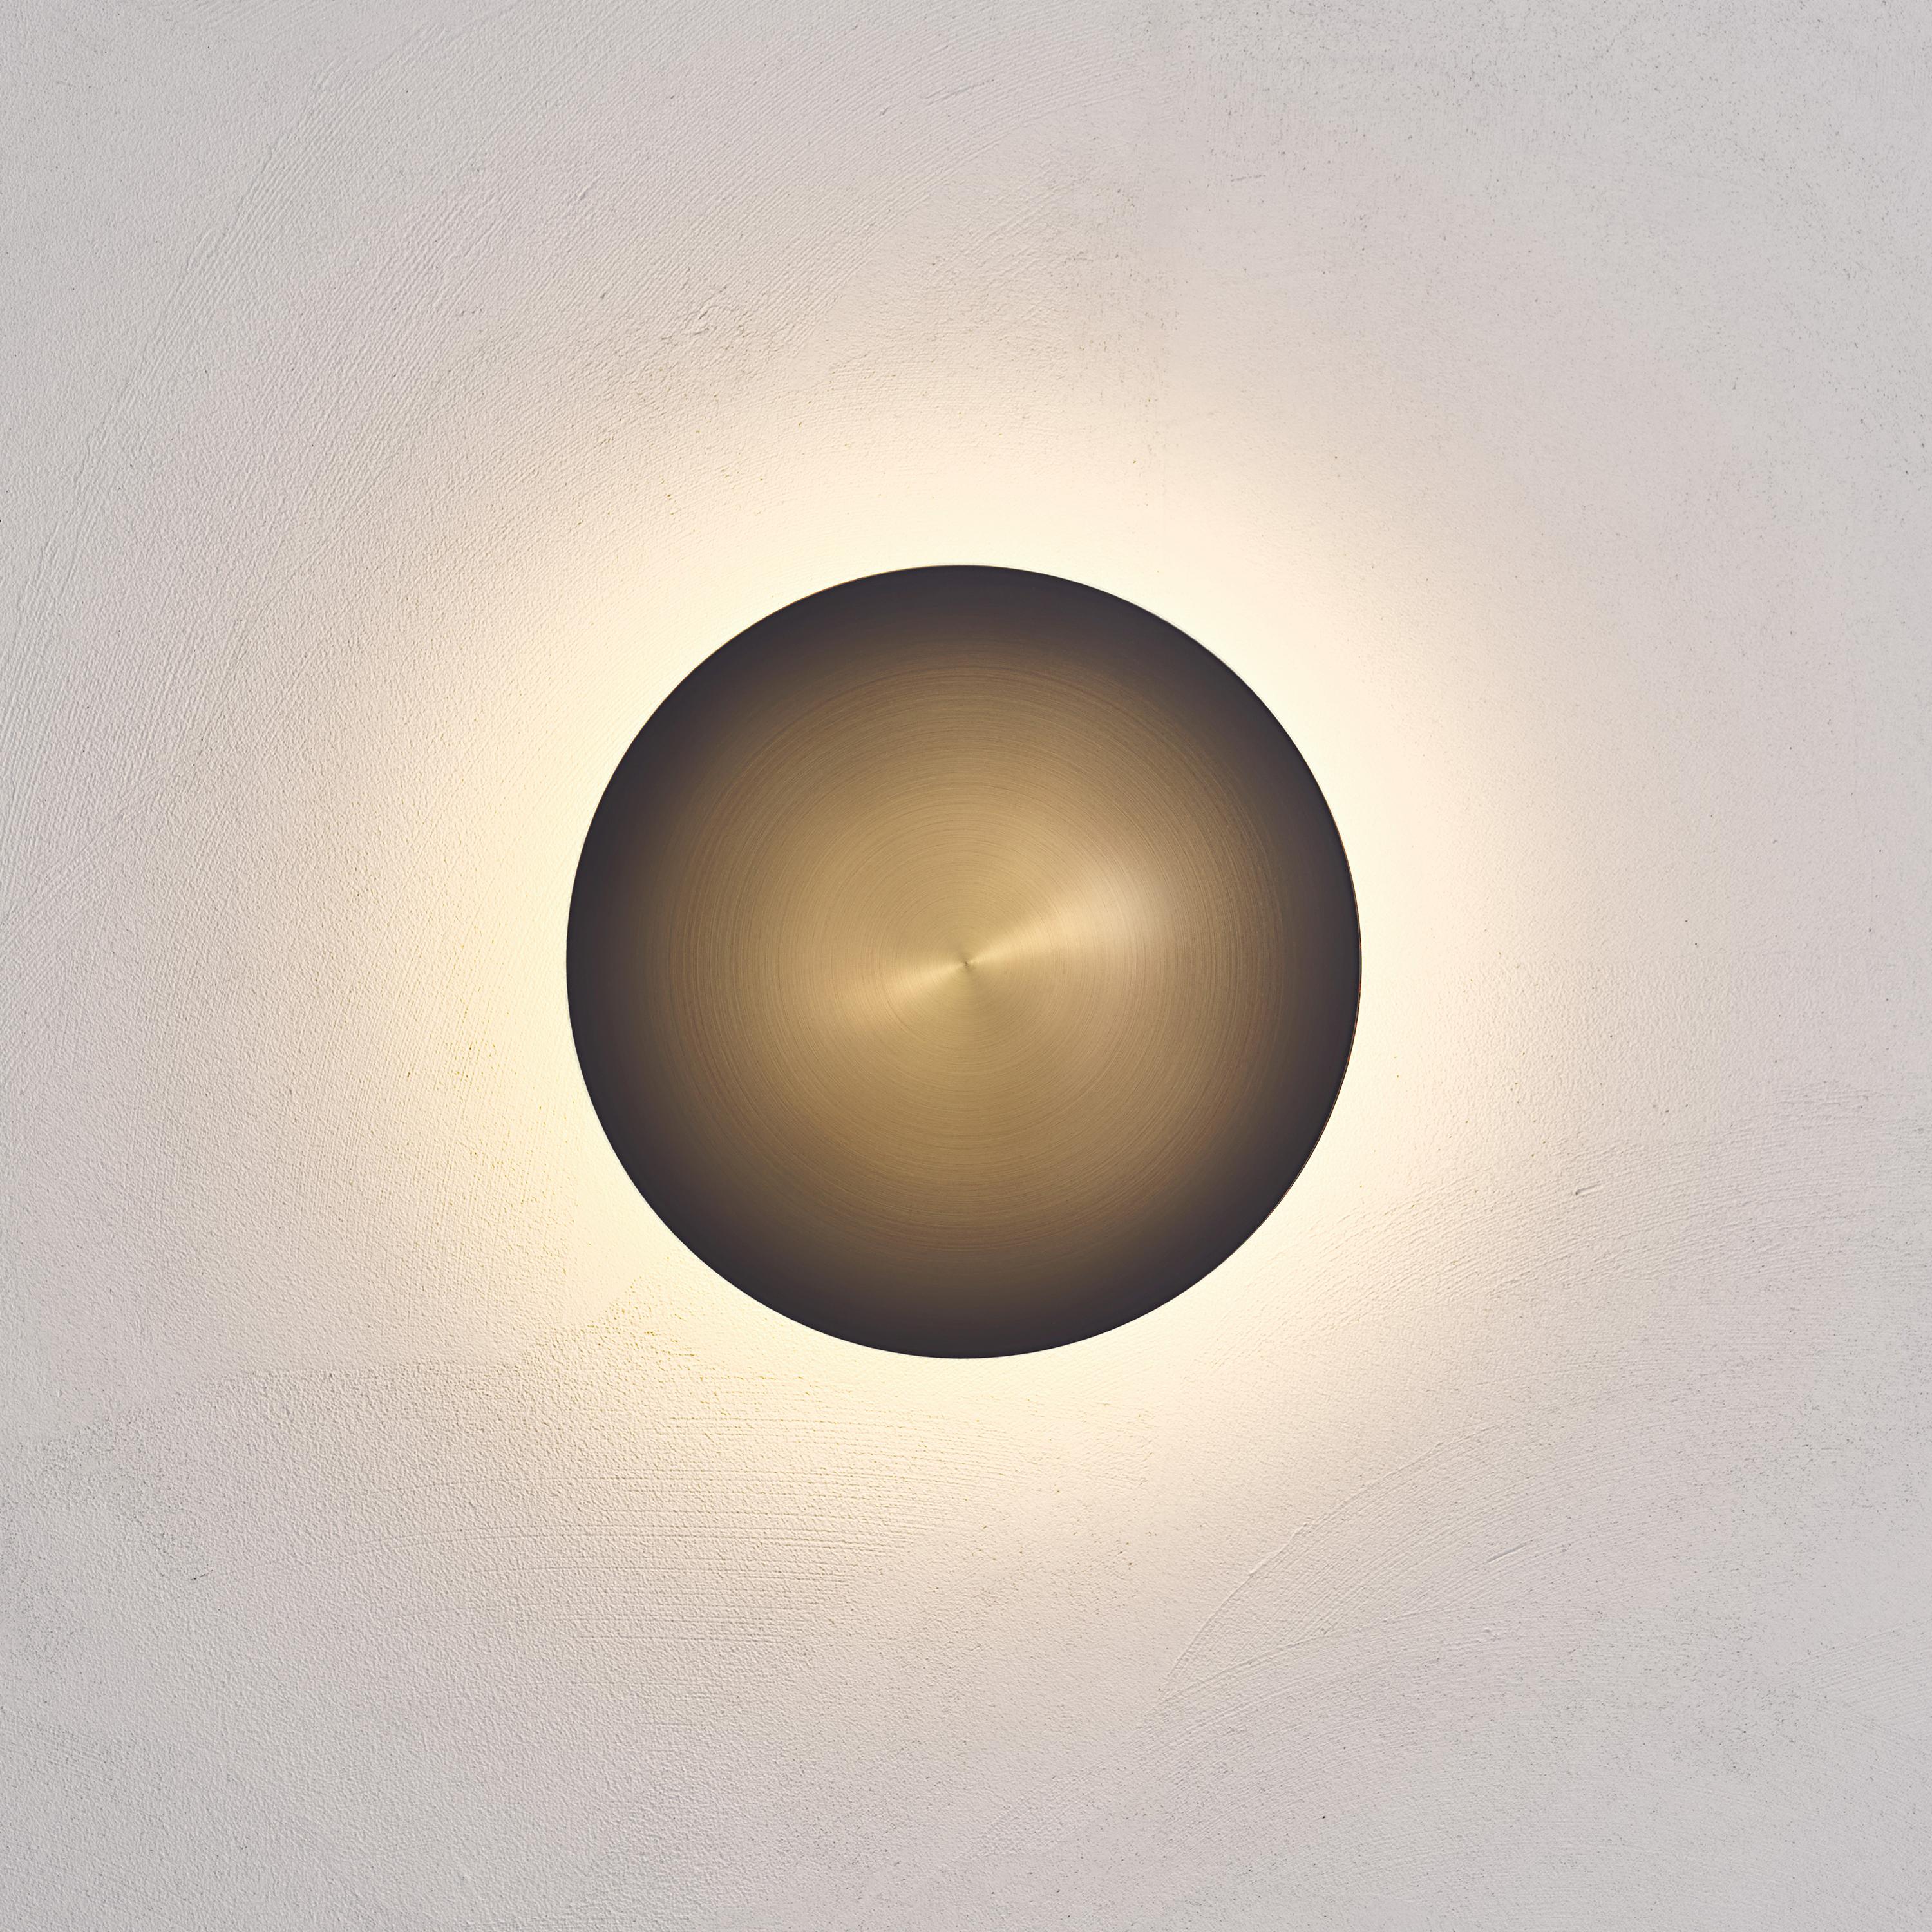 Cosmic 'Comet Ore 26' bronze Gradient patinated brass wall light, sconce

Named after the astronomical object that signals a rebirth and new ideas, the ‘Comet’ pieces are achieved with skilful brass shaping and patina finishes that celebrate British